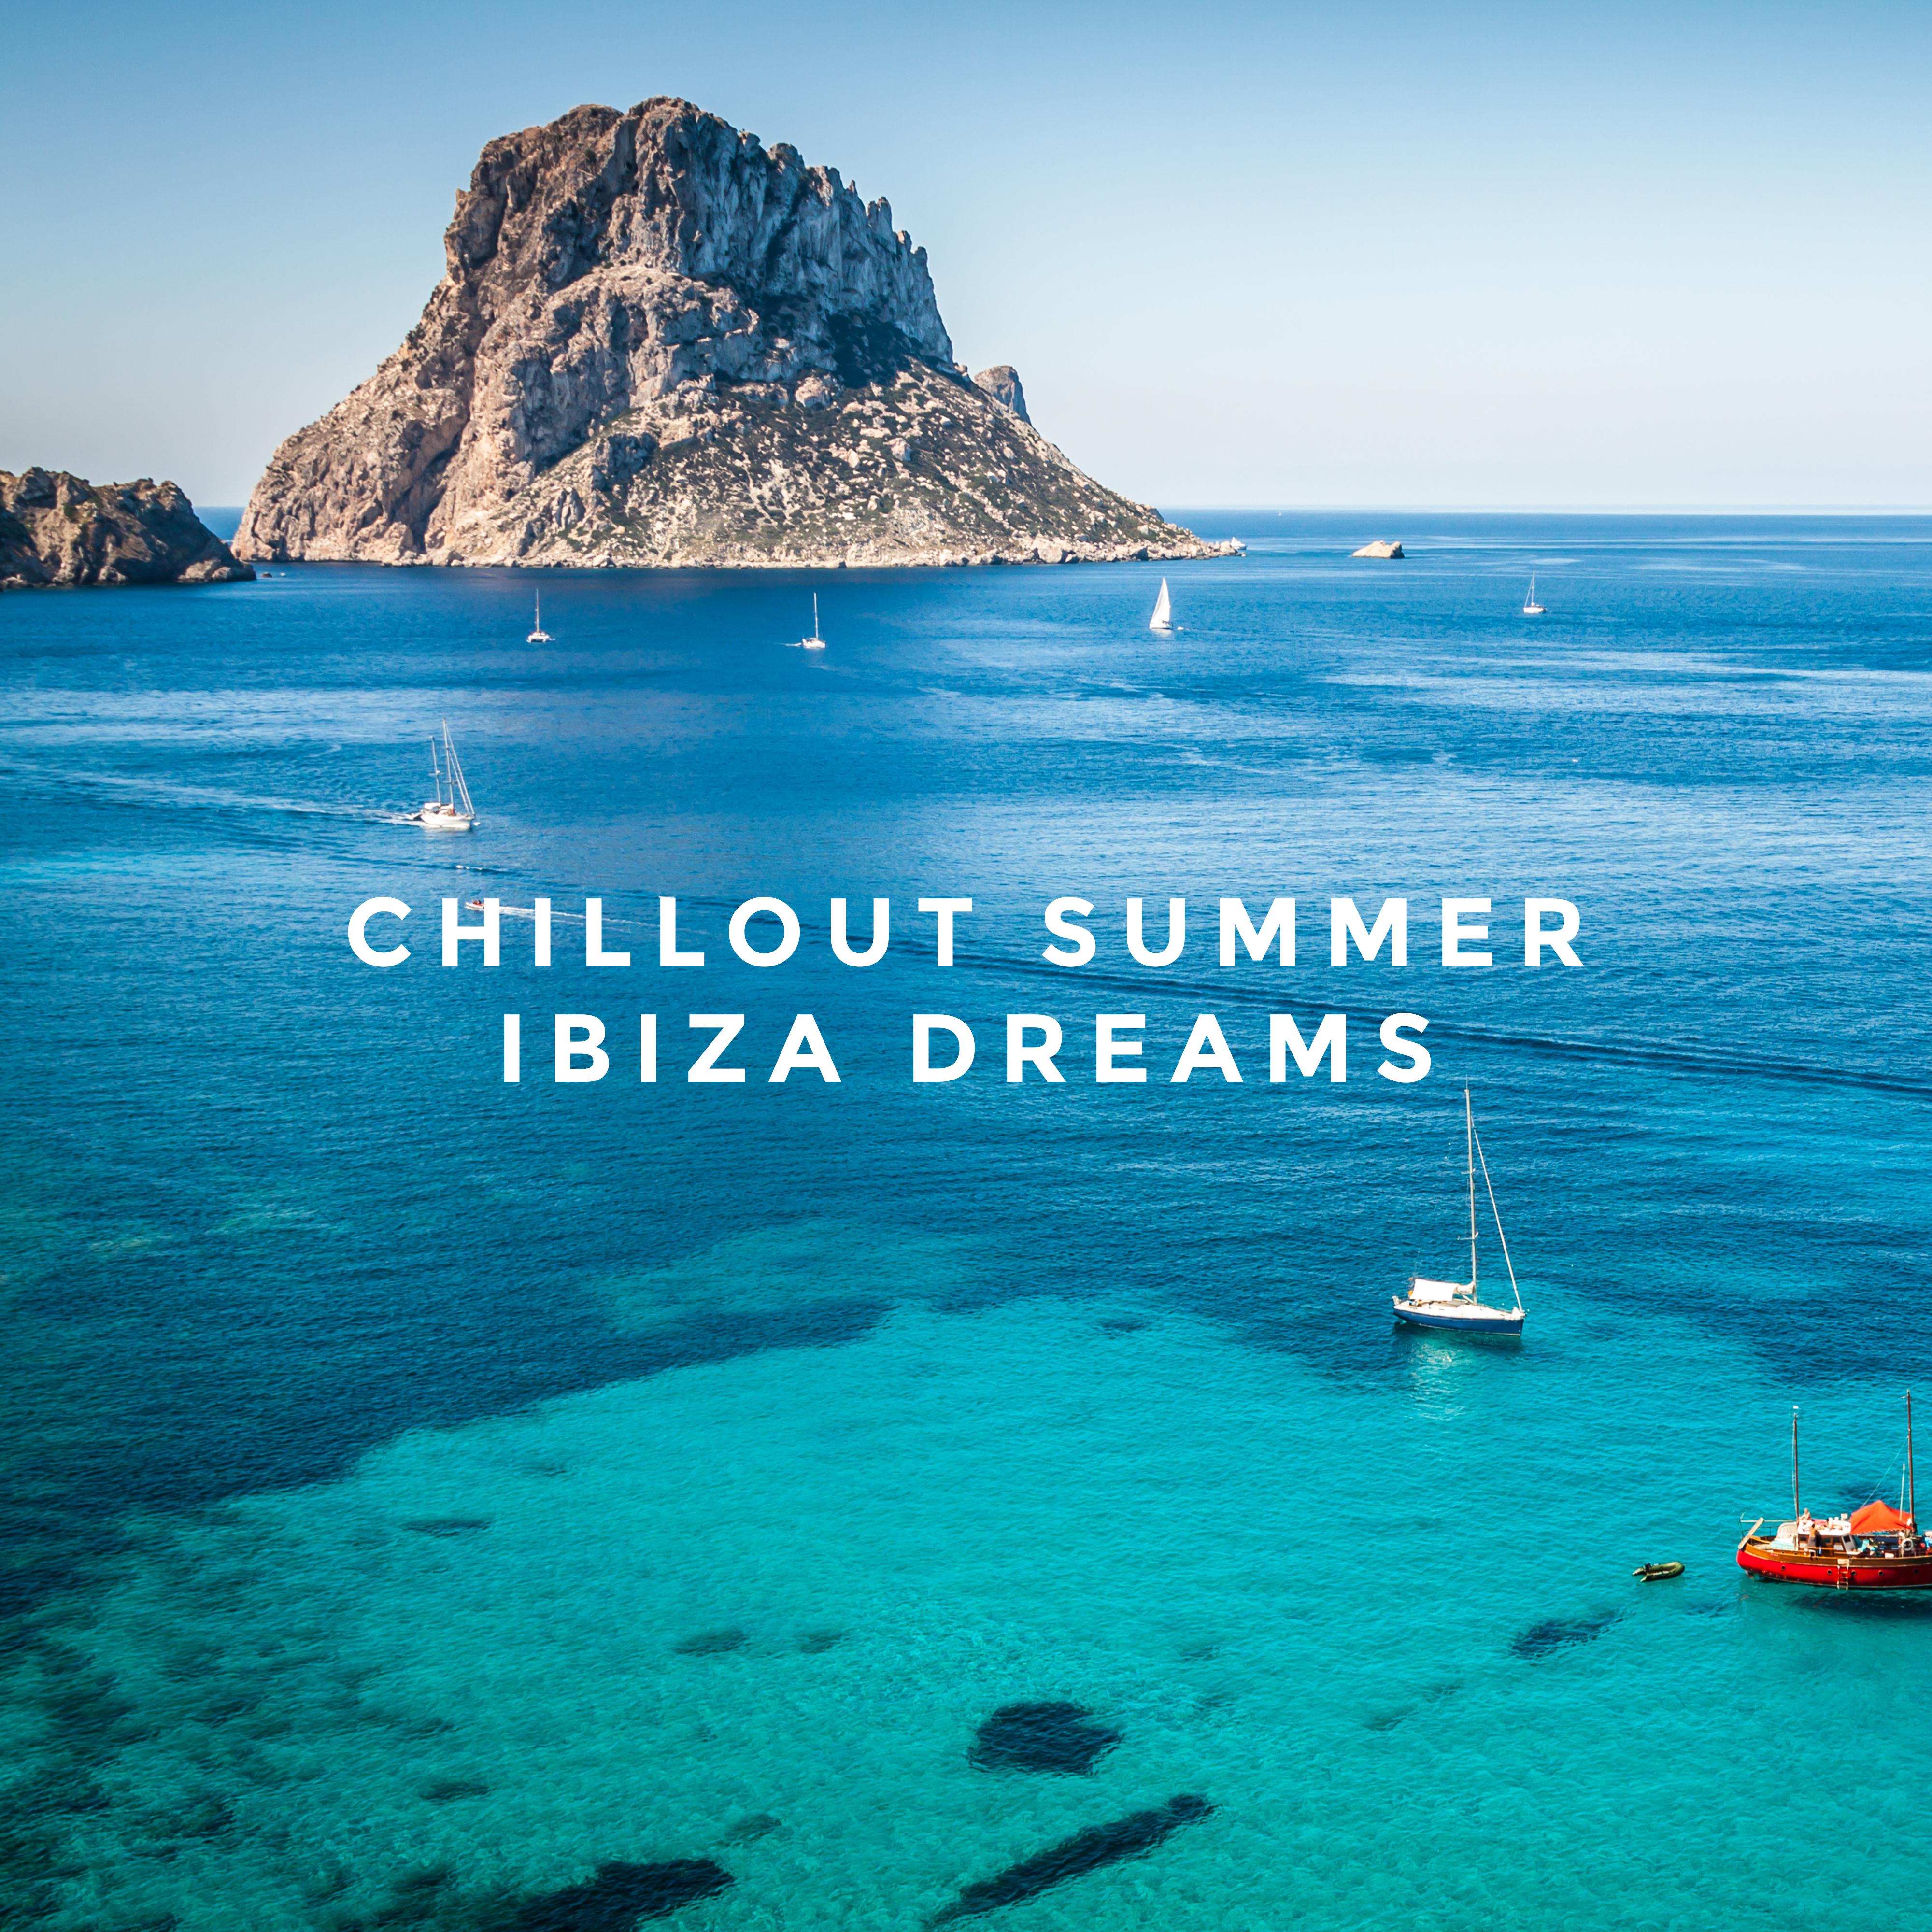 Chillout Summer Ibiza Dreams: 15 Most Relaxing Chill Out Tracks in 2019, Perfect Vacation Calming Background, Deep Rest Melodic Music